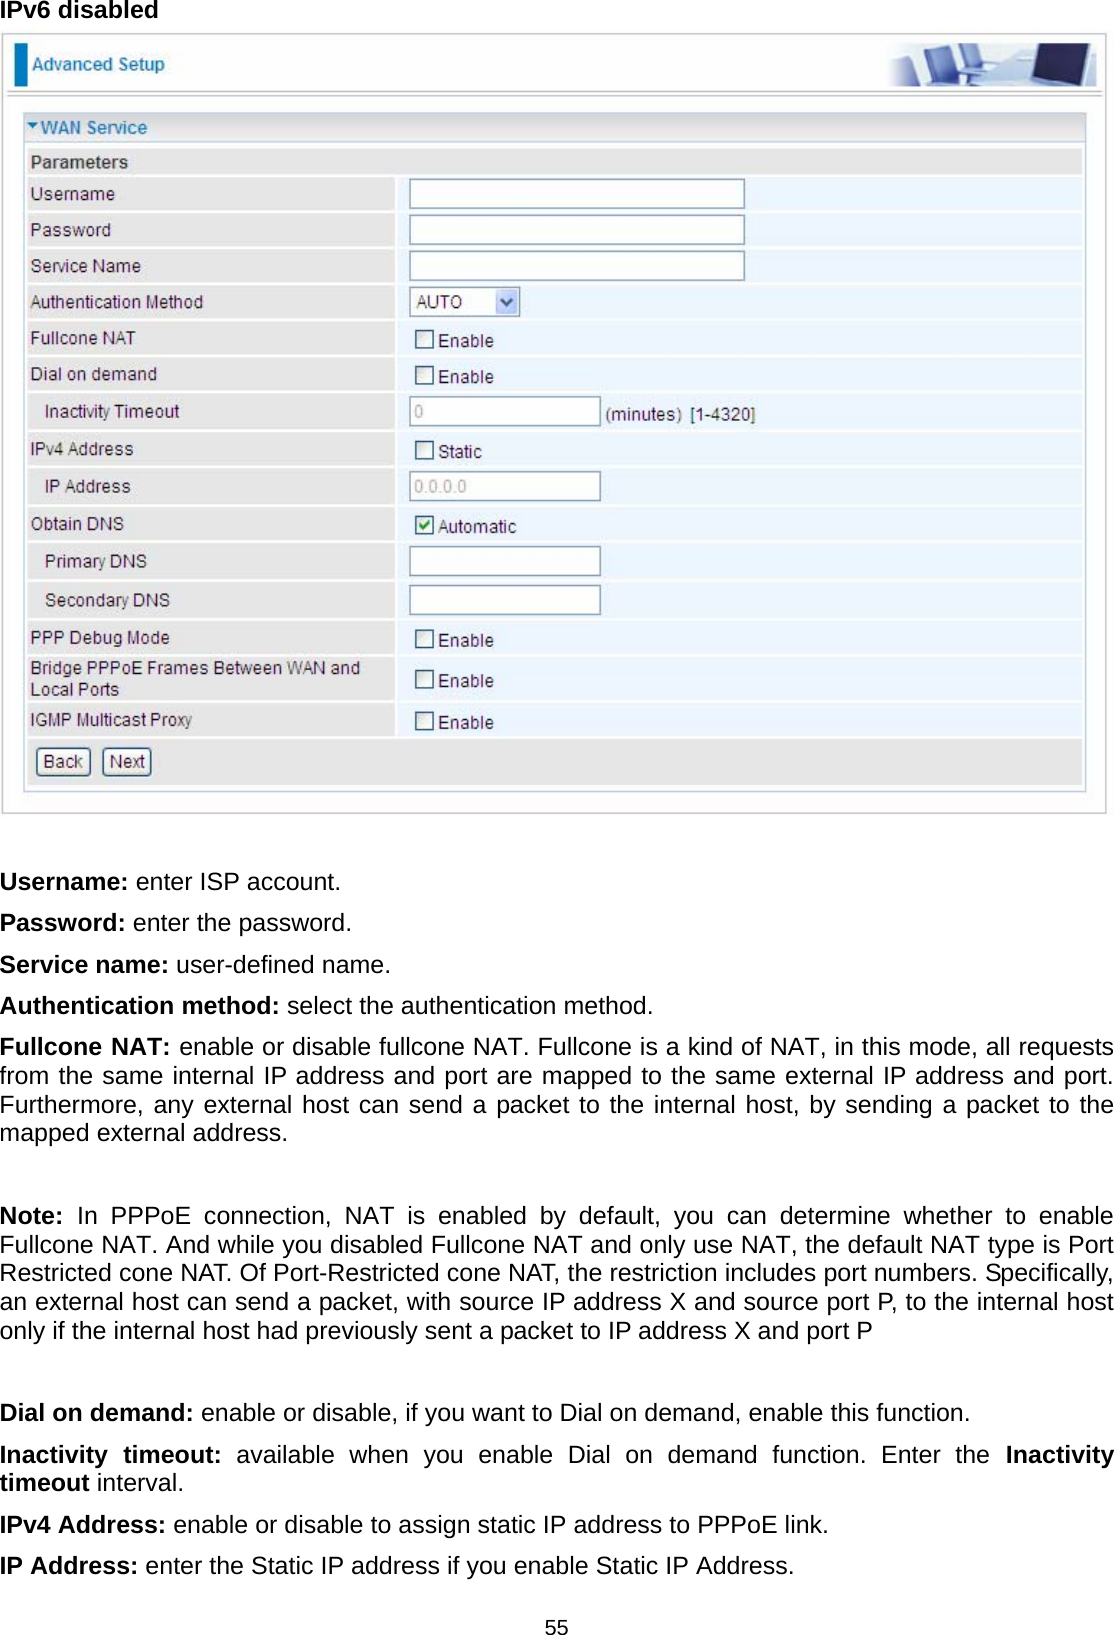  55 IPv6 disabled    Username: enter ISP account. Password: enter the password. Service name: user-defined name. Authentication method: select the authentication method. Fullcone NAT: enable or disable fullcone NAT. Fullcone is a kind of NAT, in this mode, all requests from the same internal IP address and port are mapped to the same external IP address and port. Furthermore, any external host can send a packet to the internal host, by sending a packet to the mapped external address.   Note:  In PPPoE connection, NAT is enabled by default, you can determine whether to enable Fullcone NAT. And while you disabled Fullcone NAT and only use NAT, the default NAT type is Port Restricted cone NAT. Of Port-Restricted cone NAT, the restriction includes port numbers. Specifically, an external host can send a packet, with source IP address X and source port P, to the internal host only if the internal host had previously sent a packet to IP address X and port P  Dial on demand: enable or disable, if you want to Dial on demand, enable this function. Inactivity timeout: available when you enable Dial on demand function. Enter the Inactivity timeout interval.  IPv4 Address: enable or disable to assign static IP address to PPPoE link. IP Address: enter the Static IP address if you enable Static IP Address. 